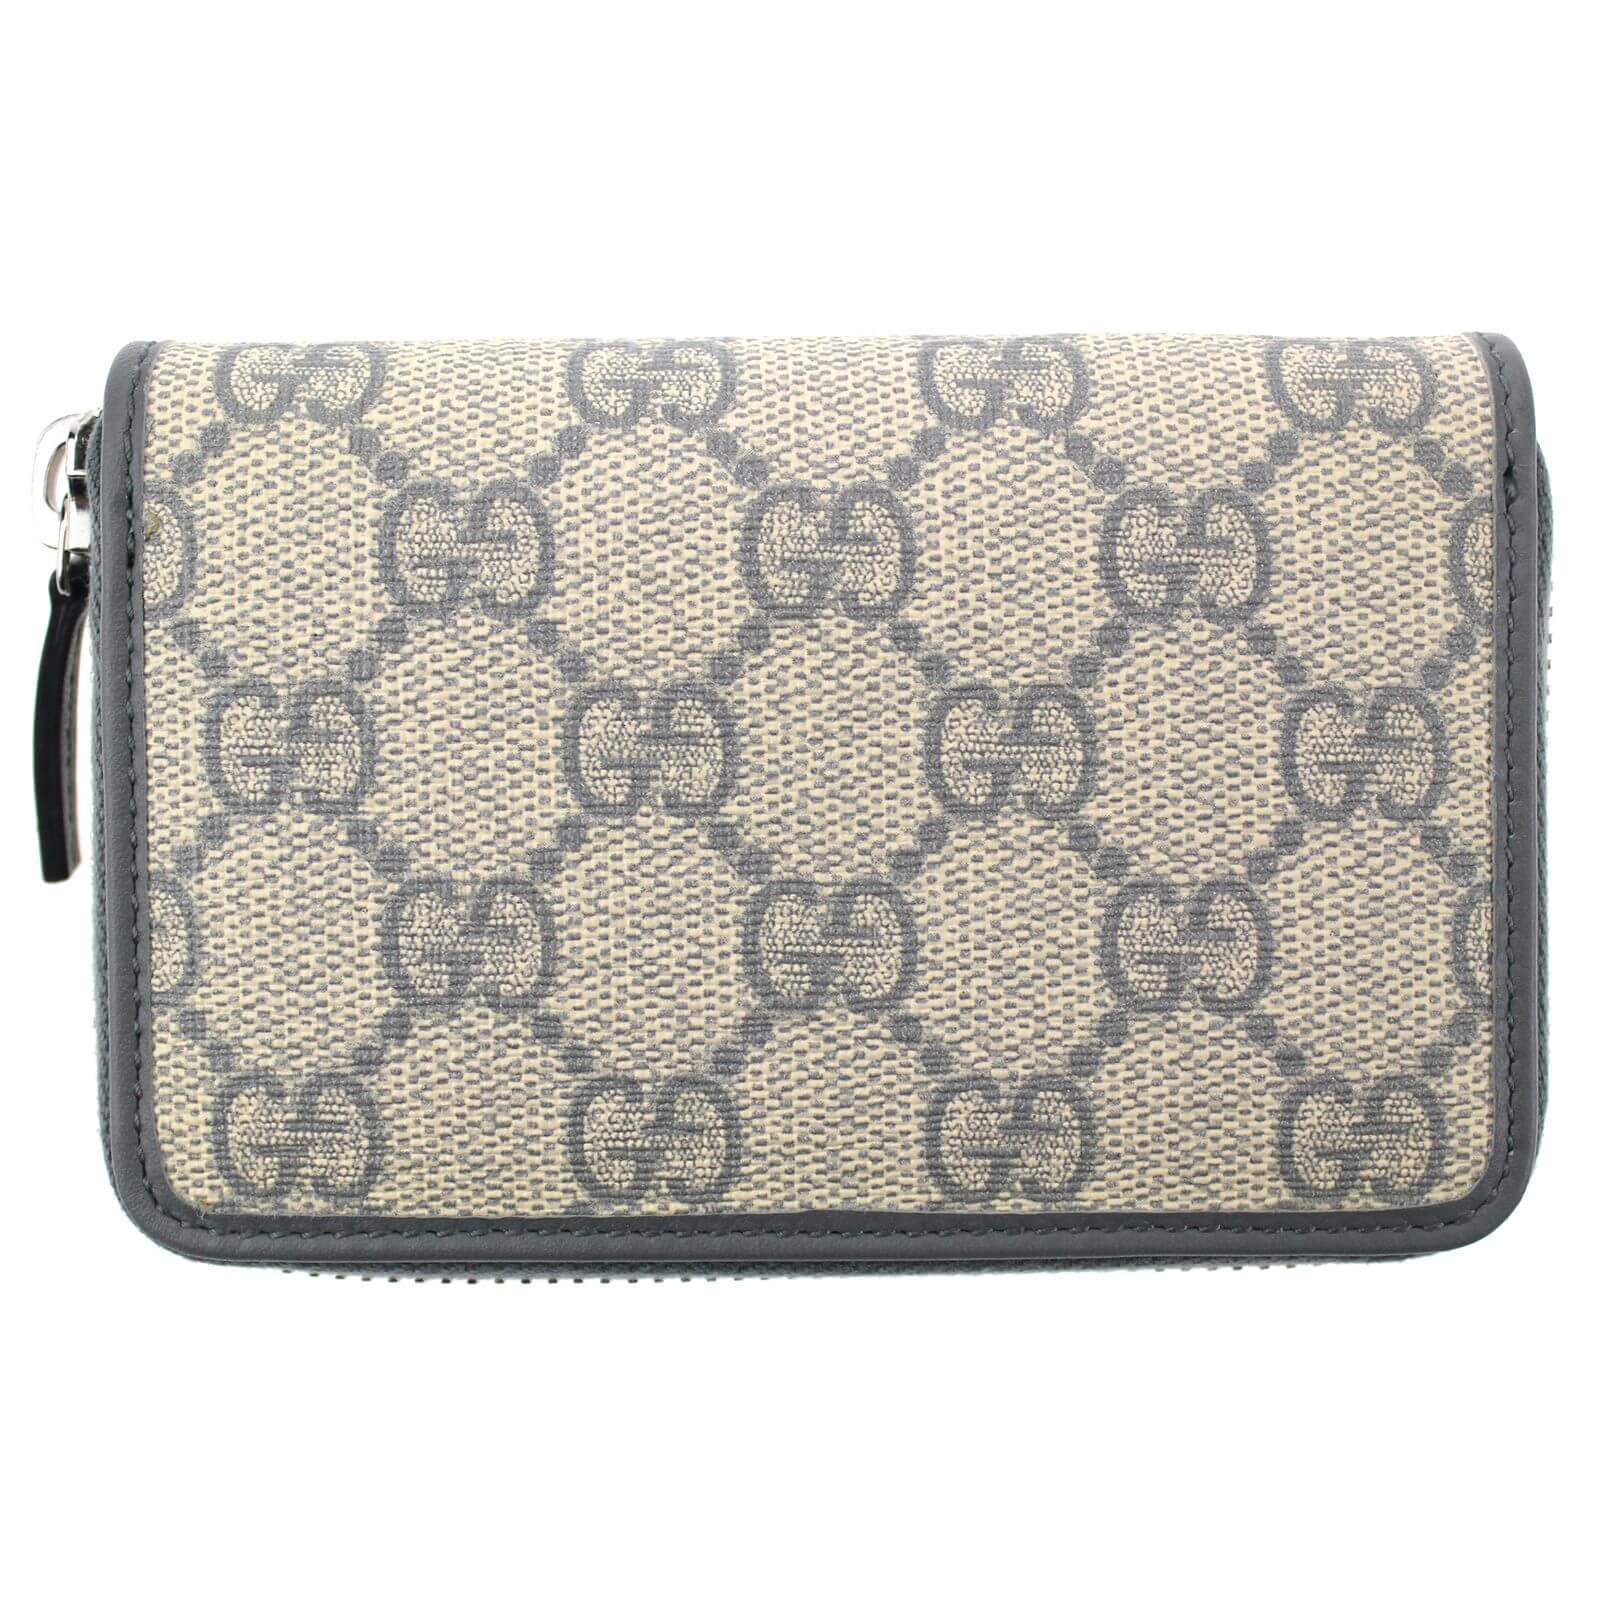 Gucci Ophidia GG card Case Wallet Authentic New! $495